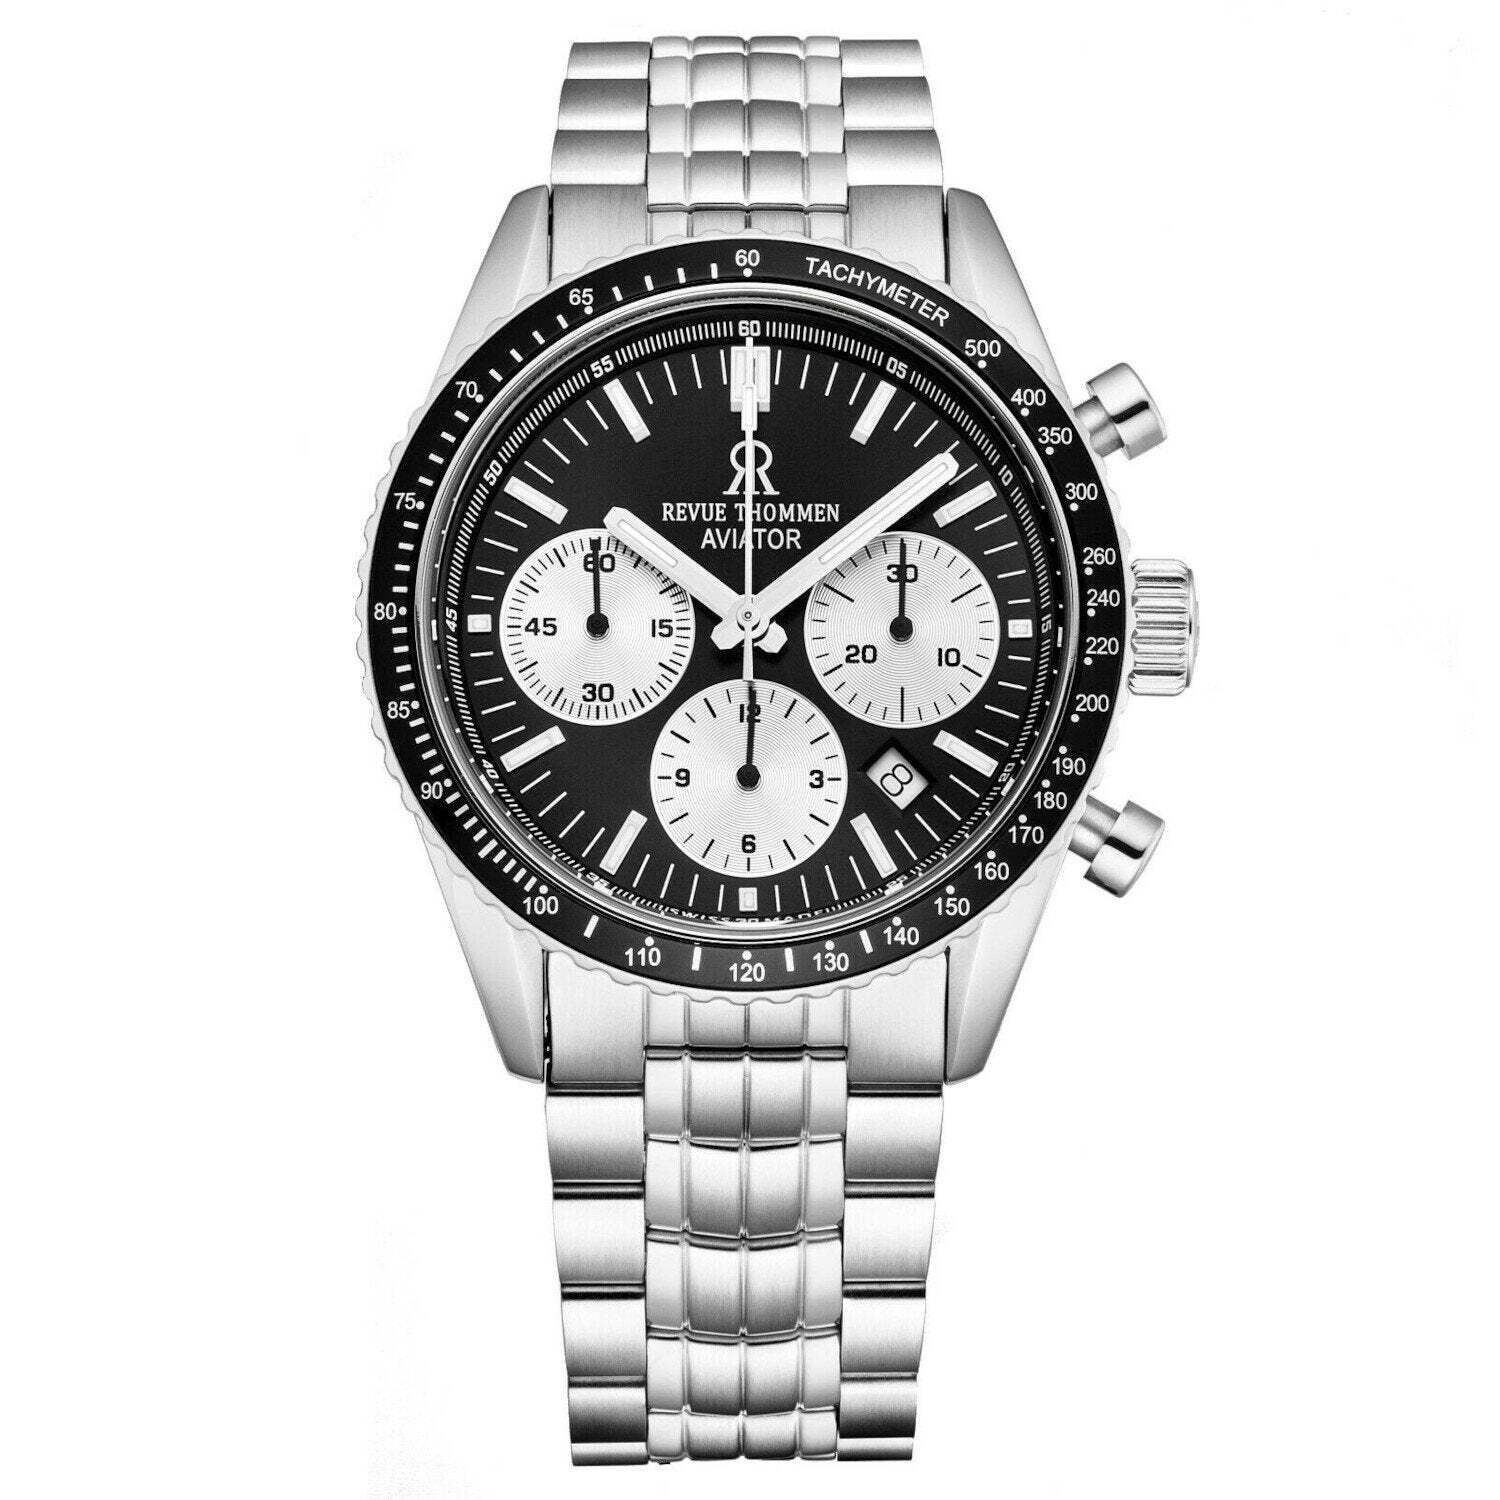 Revue Thommen 17000.6134 Men's 'Aviator' Black Dial Stainless Steel Chronograph Automatic Watch